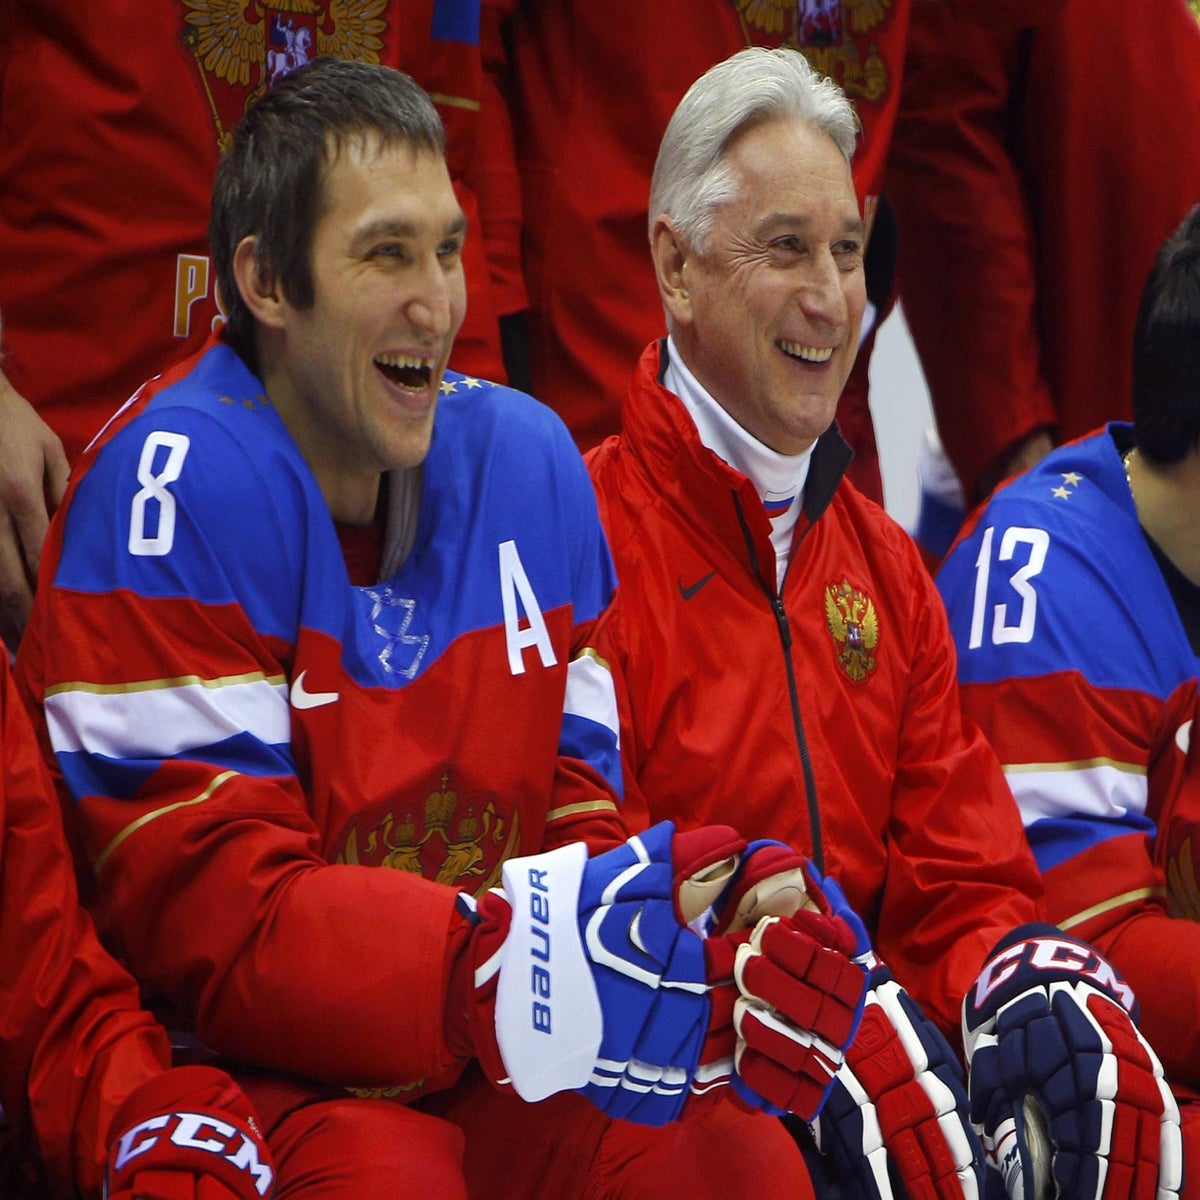 Winter Olympics 2014: Russia's ice hockey poster boy fails to get